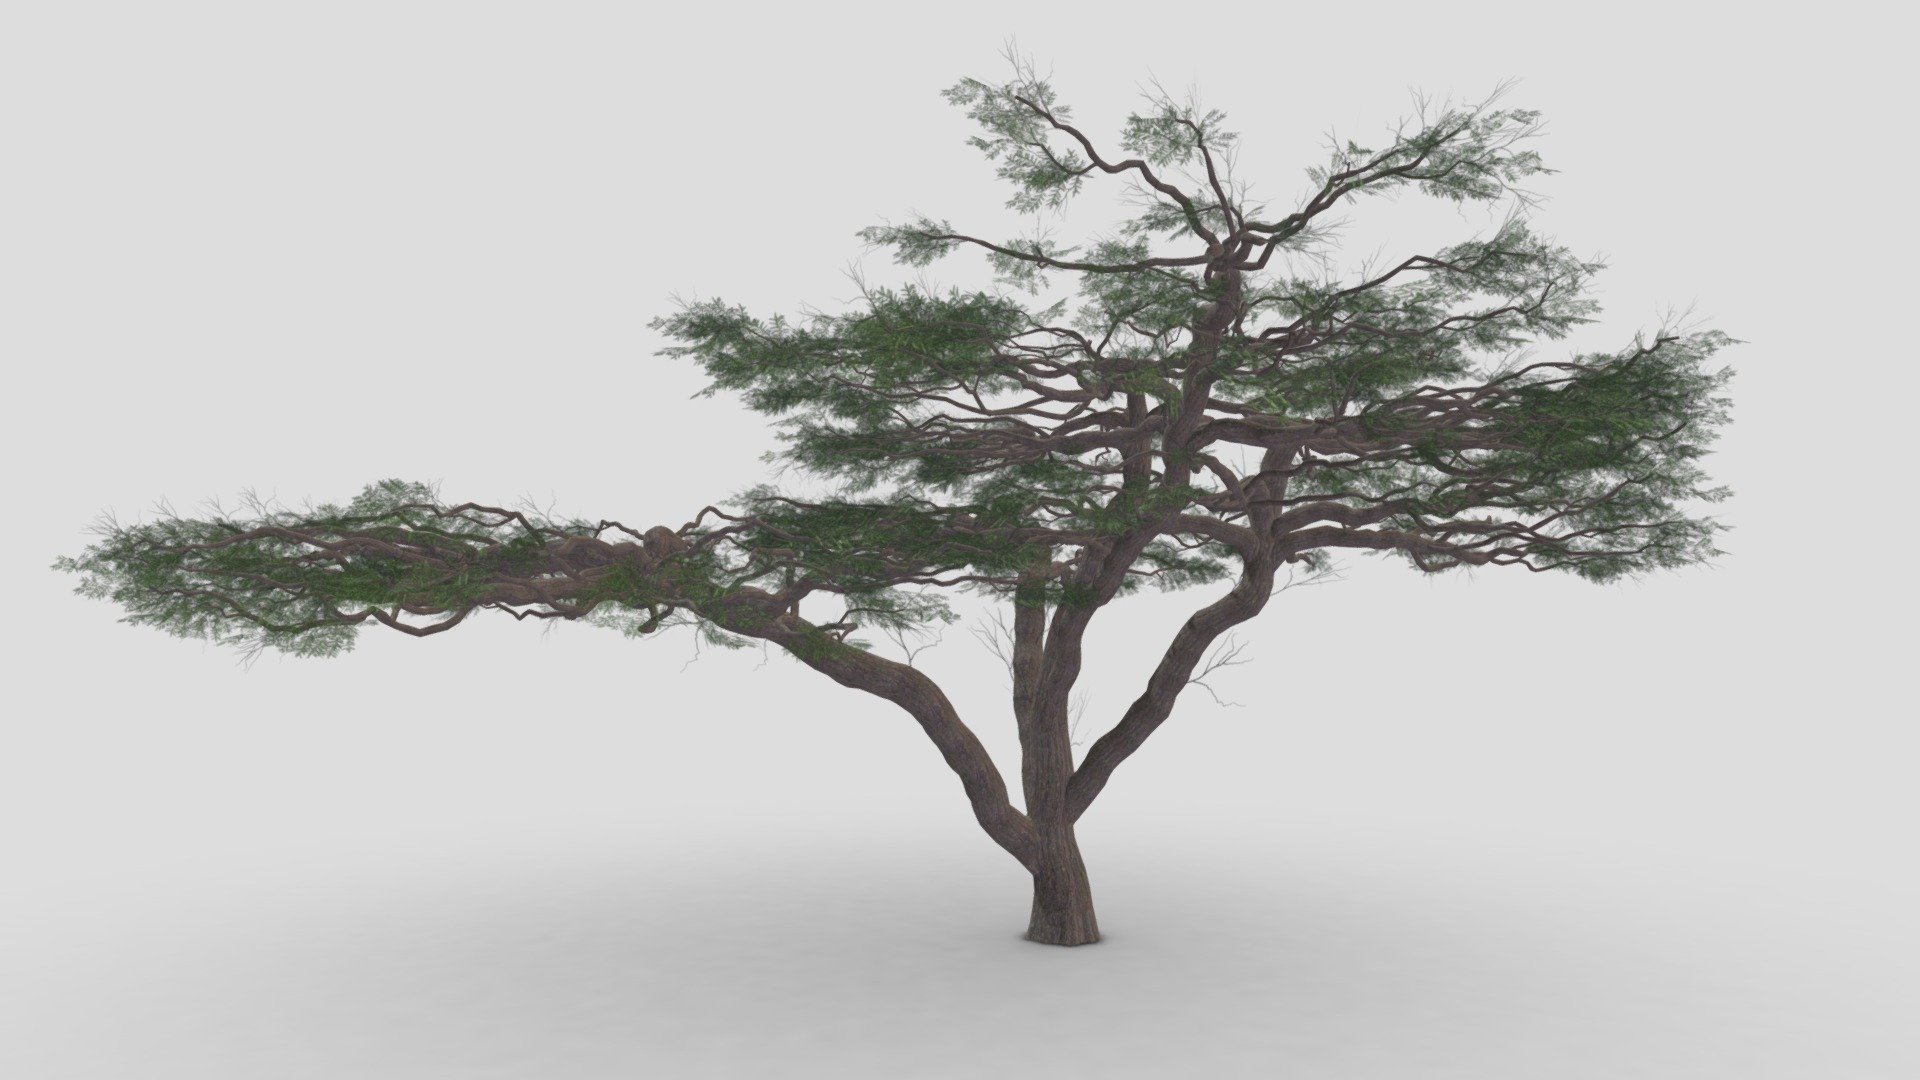 acacia, (genus Acacia), genus of about 160 species of trees and shrubs in the pea family (Fabaceae). Acacias are native to tropical and subtropical regions of the world, particularly Australia (where they are called wattles) and Africa, where they are well-known landmarks on the veld and savanna 3d model